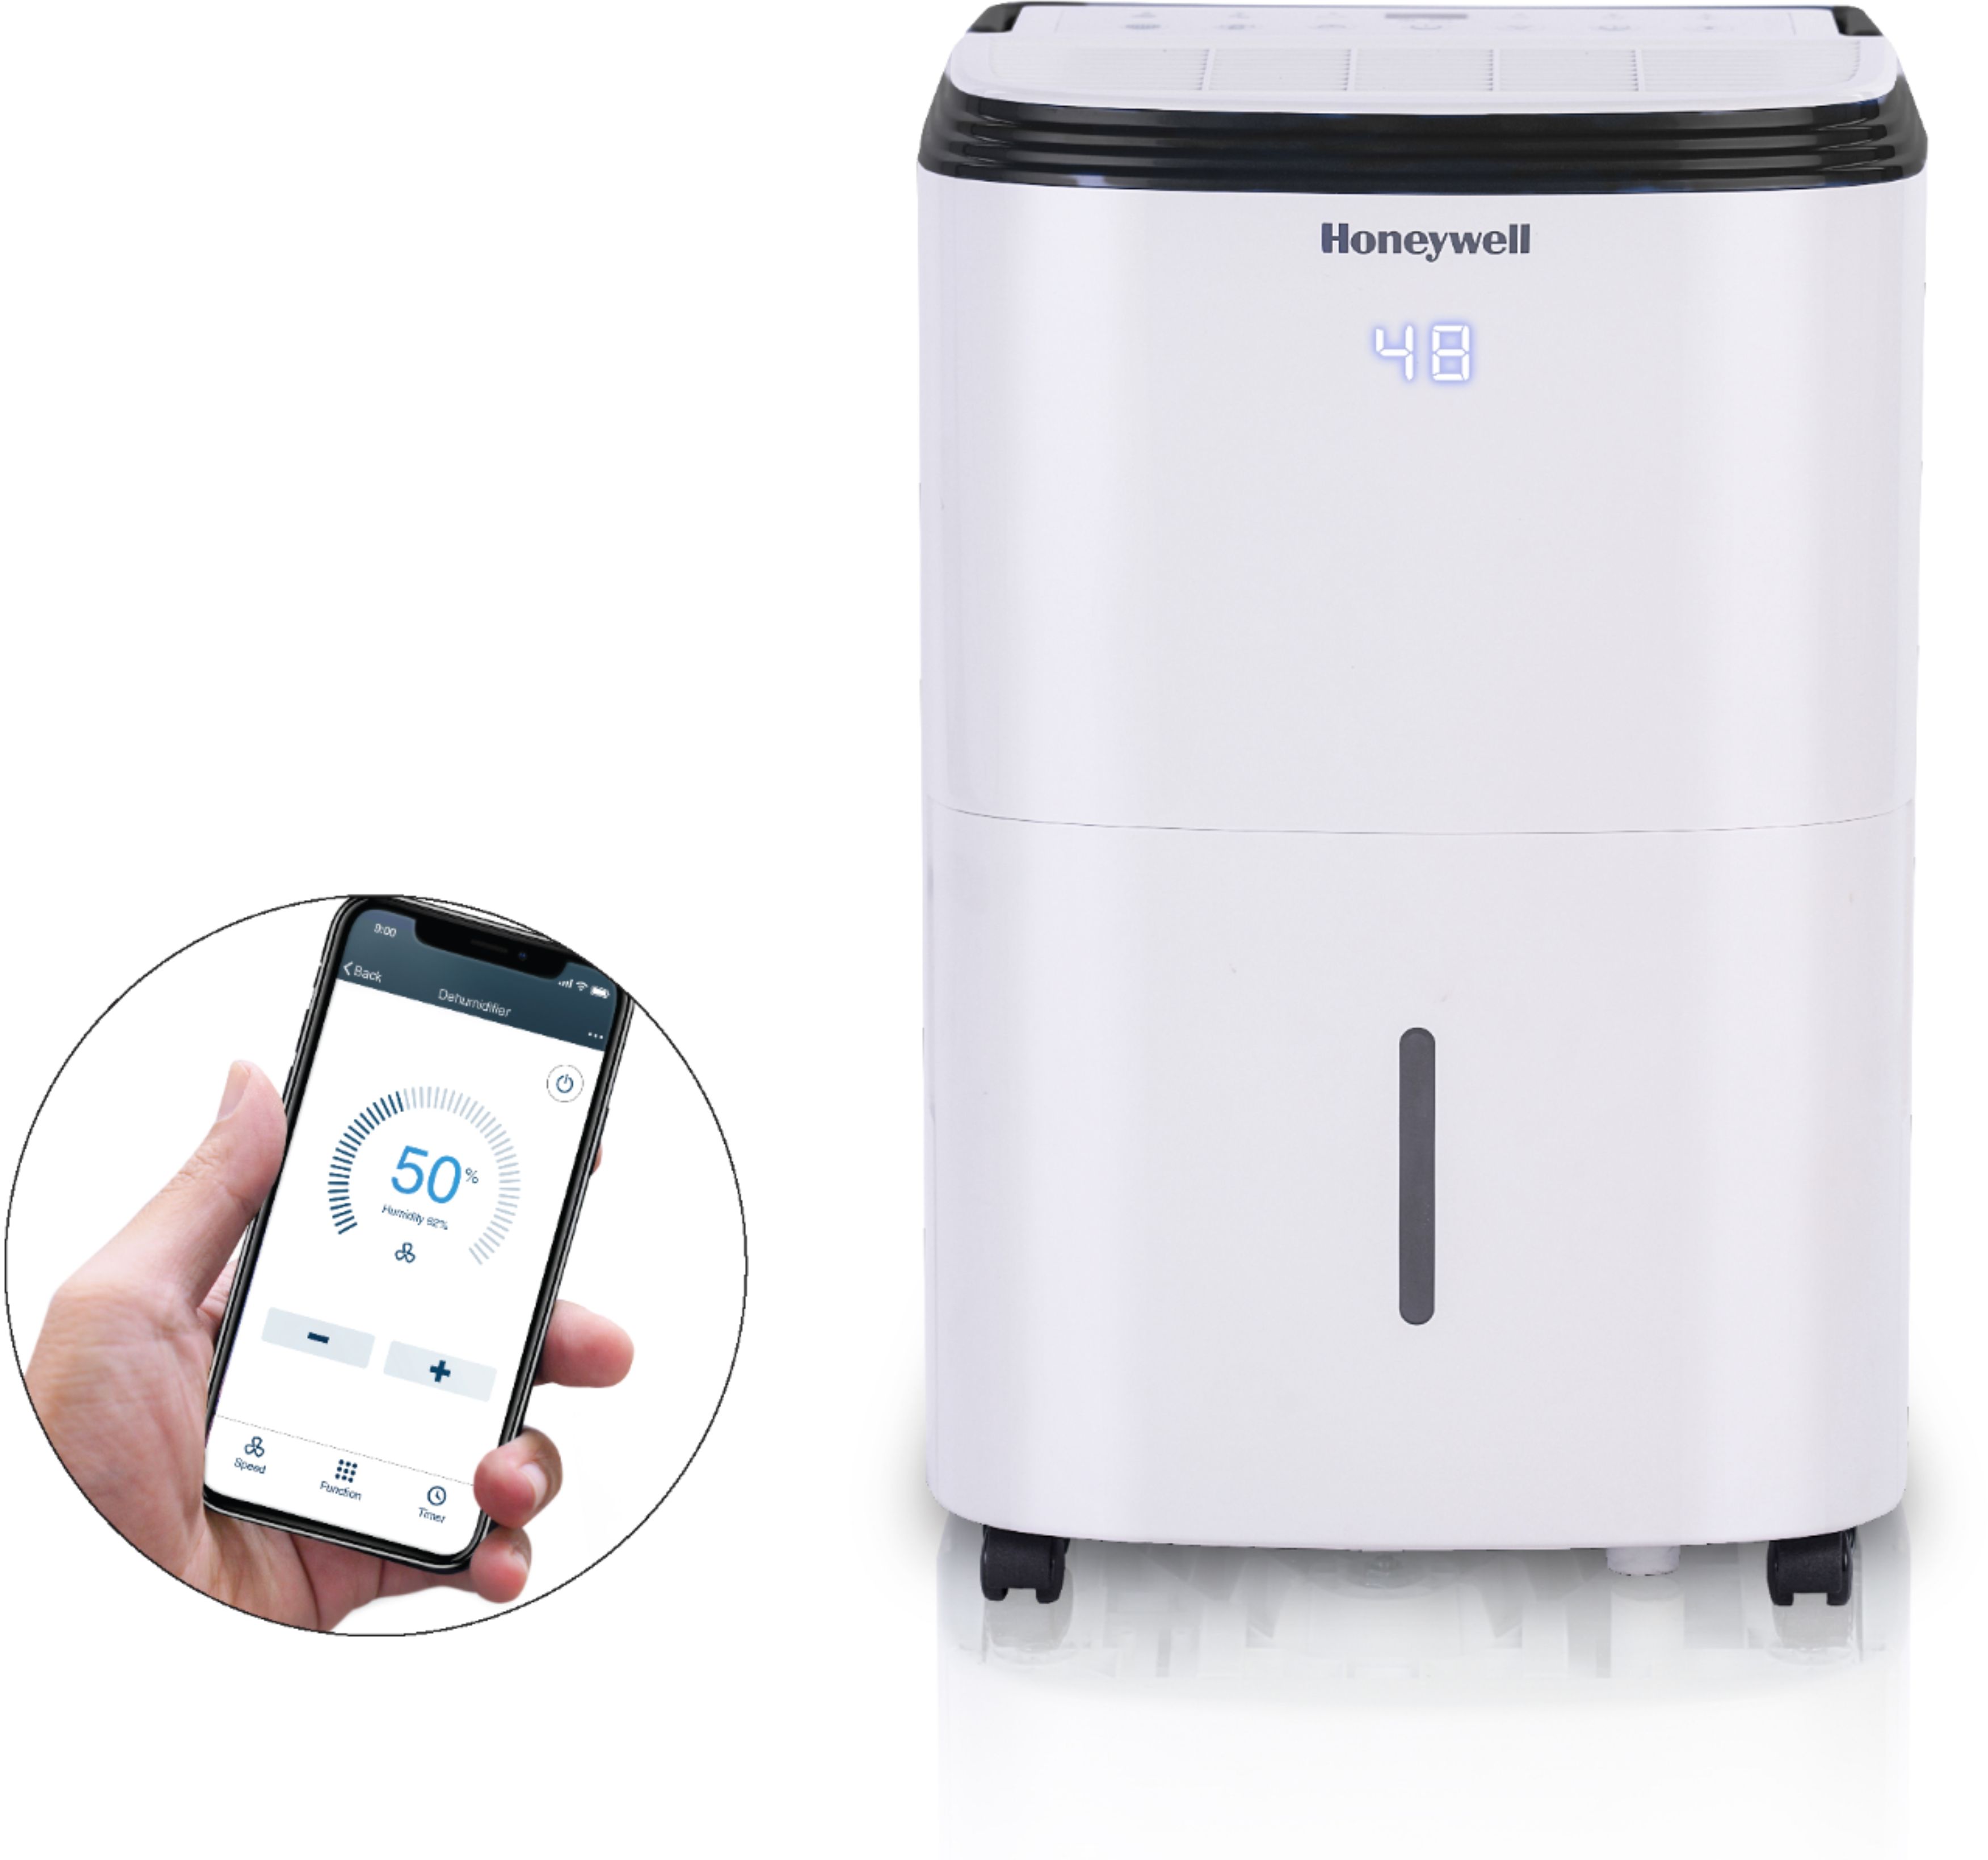 Zoom in on Alt View Zoom 13. Honeywell - Smart WiFi Energy Star Dehumidifier for Basements & Rooms Up to 4000 Sq.Ft. with Alexa Voice Control & Anti-Spill Design - White.